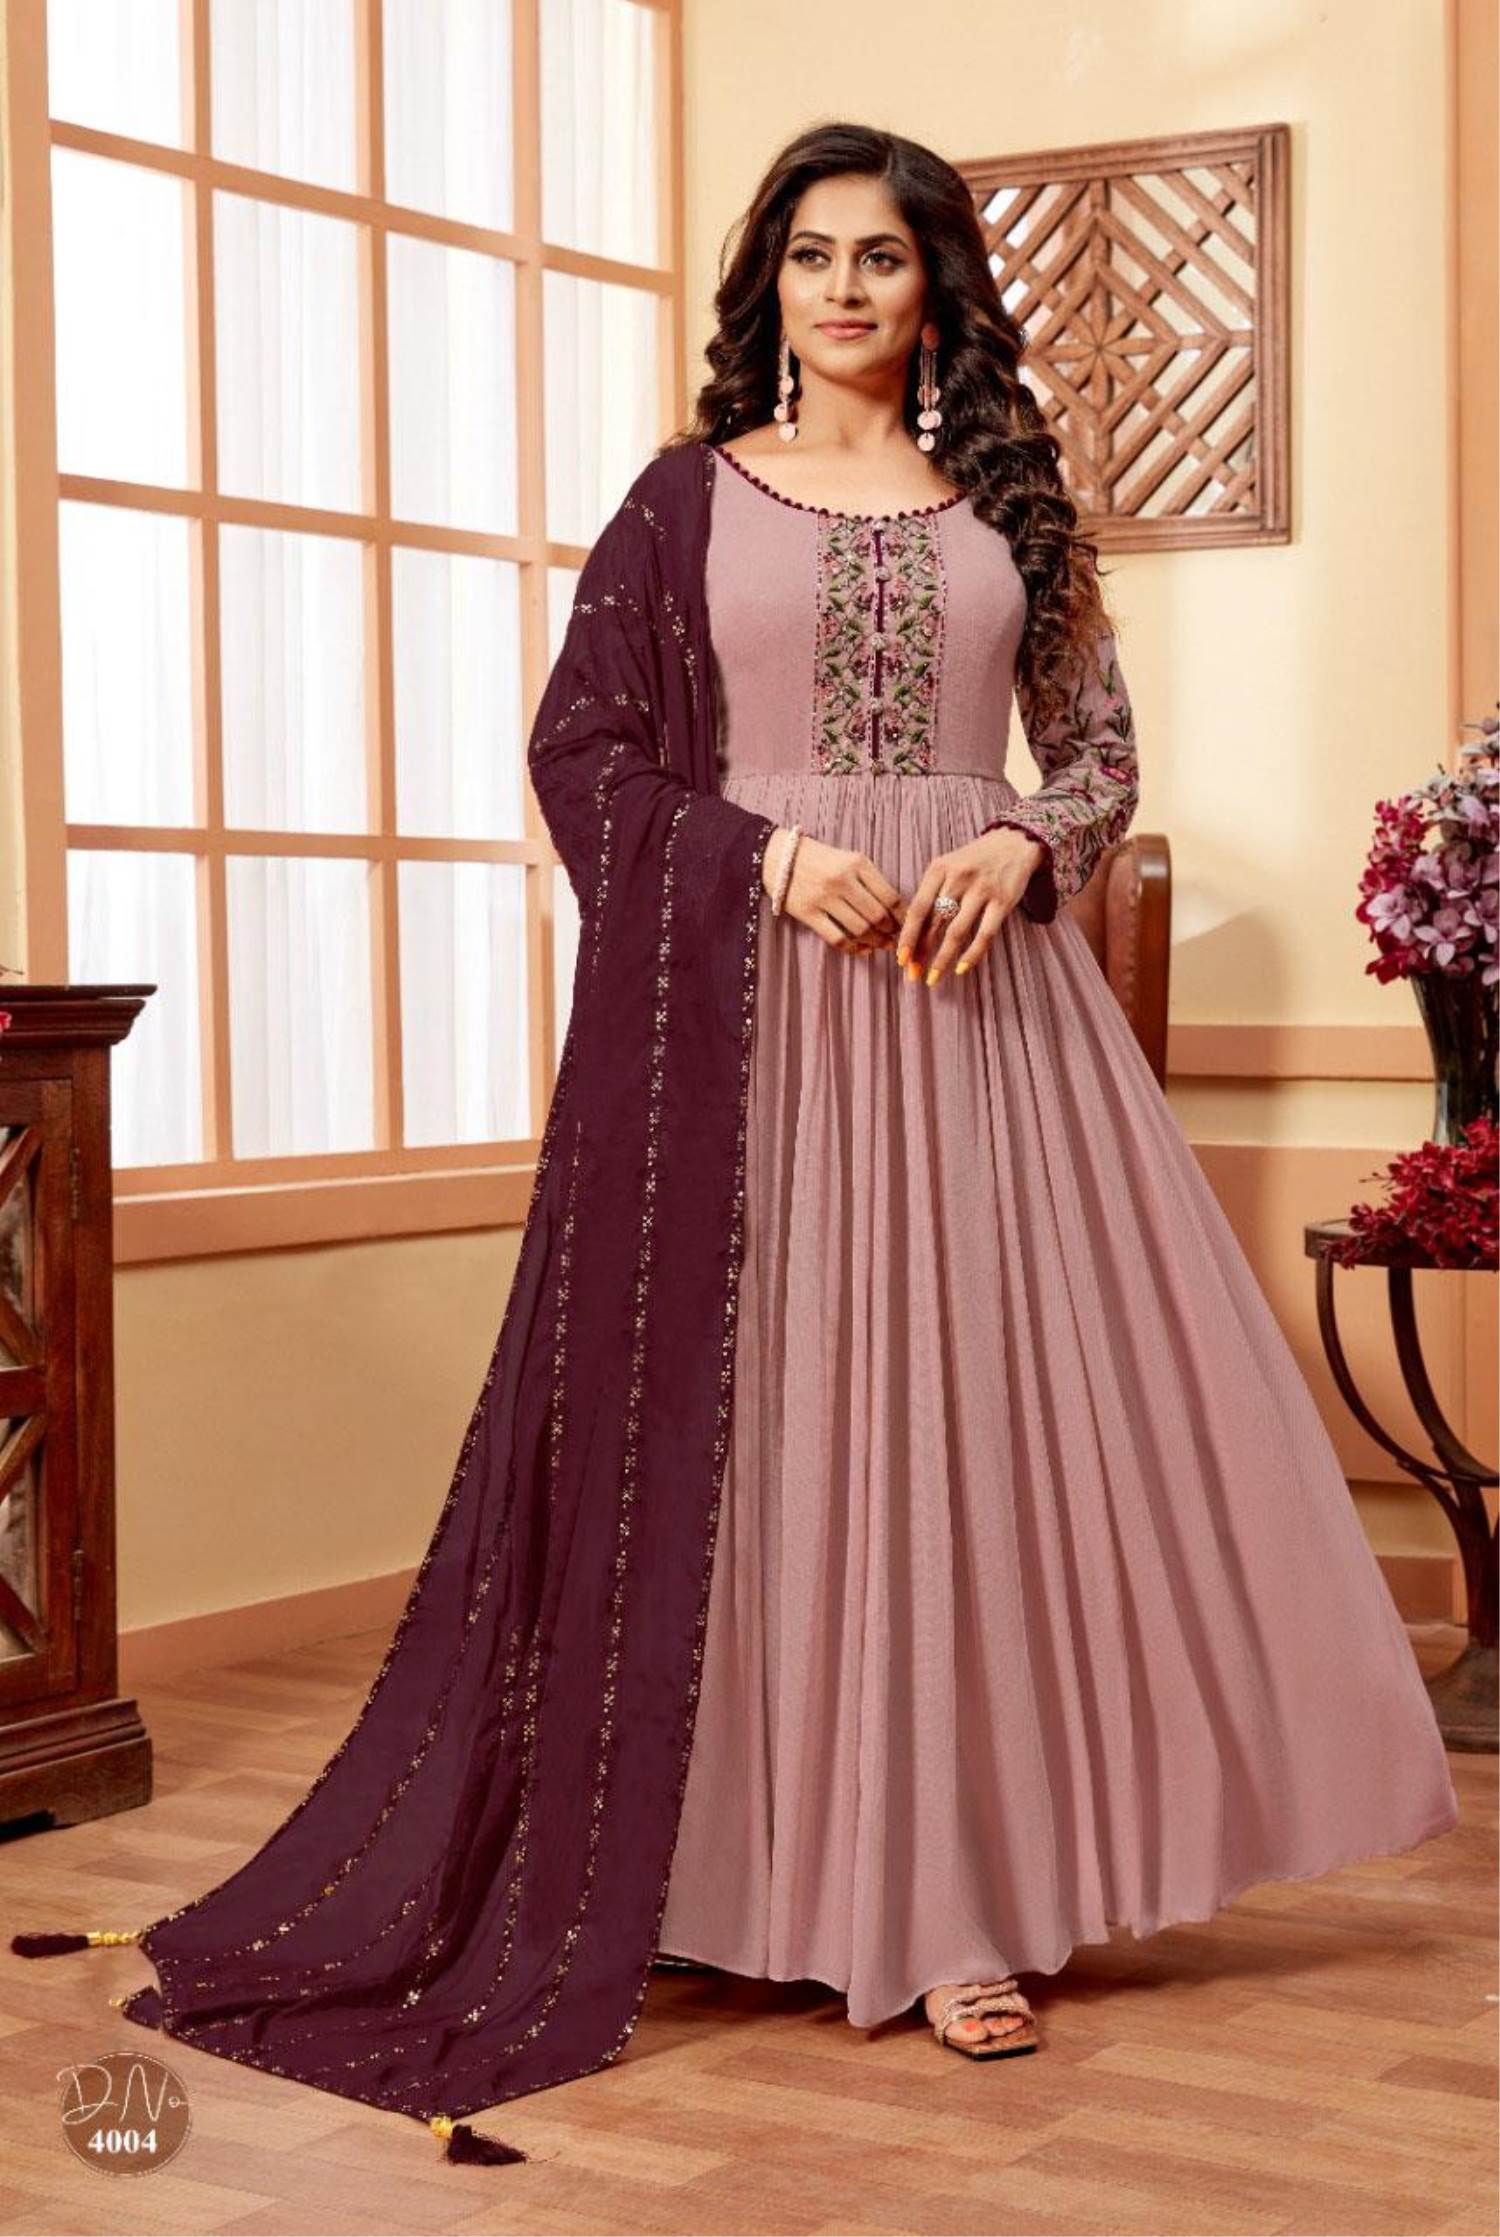 Ladies Flavour Maharani Silk With Heavy Handwork Long Gown Style Kurtis in  Chandigarh at best price by A K Enterprises - Justdial